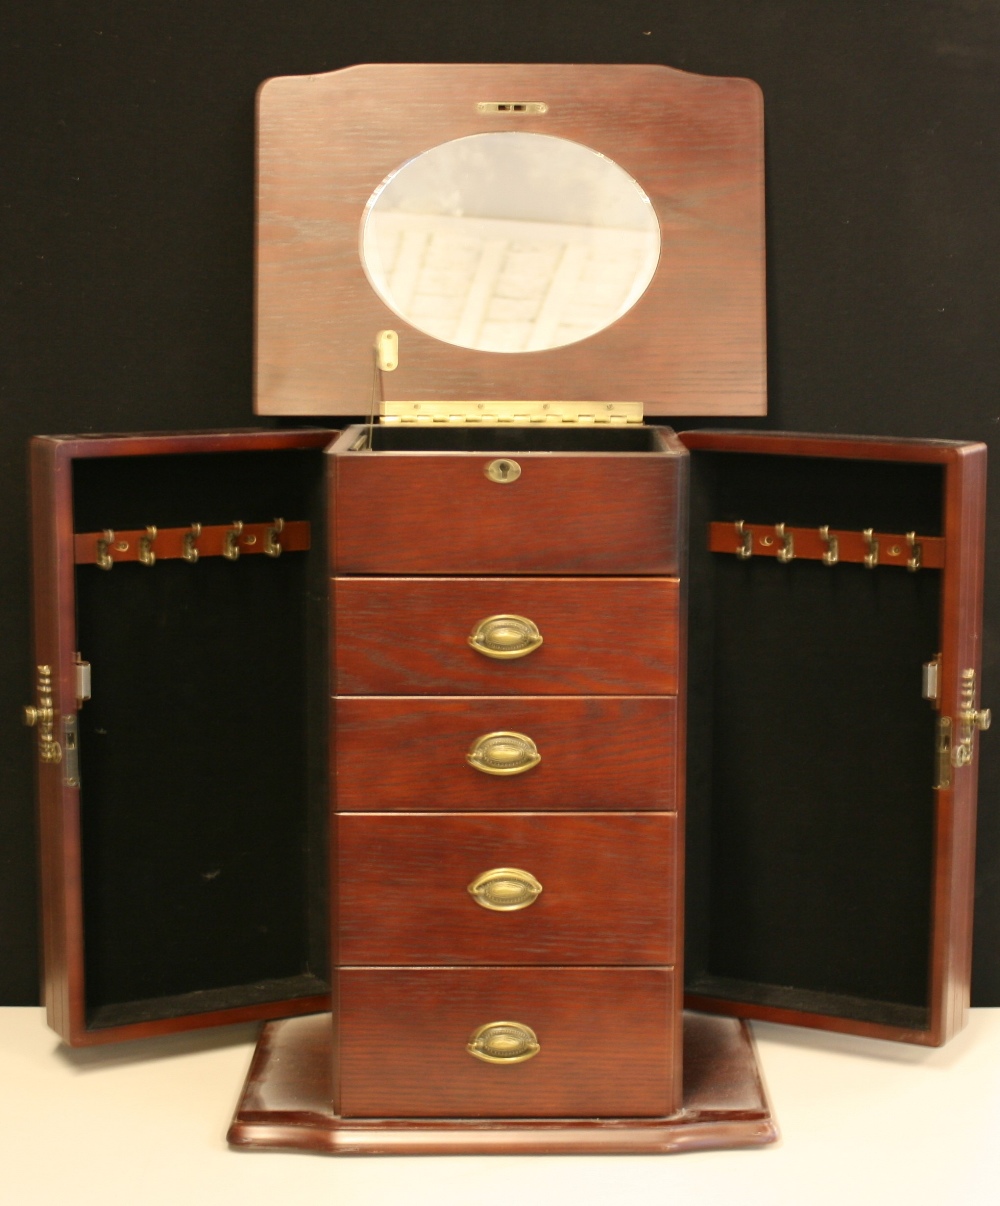 JEWELLERY CABINET - a modern musical jewellery cabinet featuring 5 drawers and 2 side partitions - Image 2 of 3